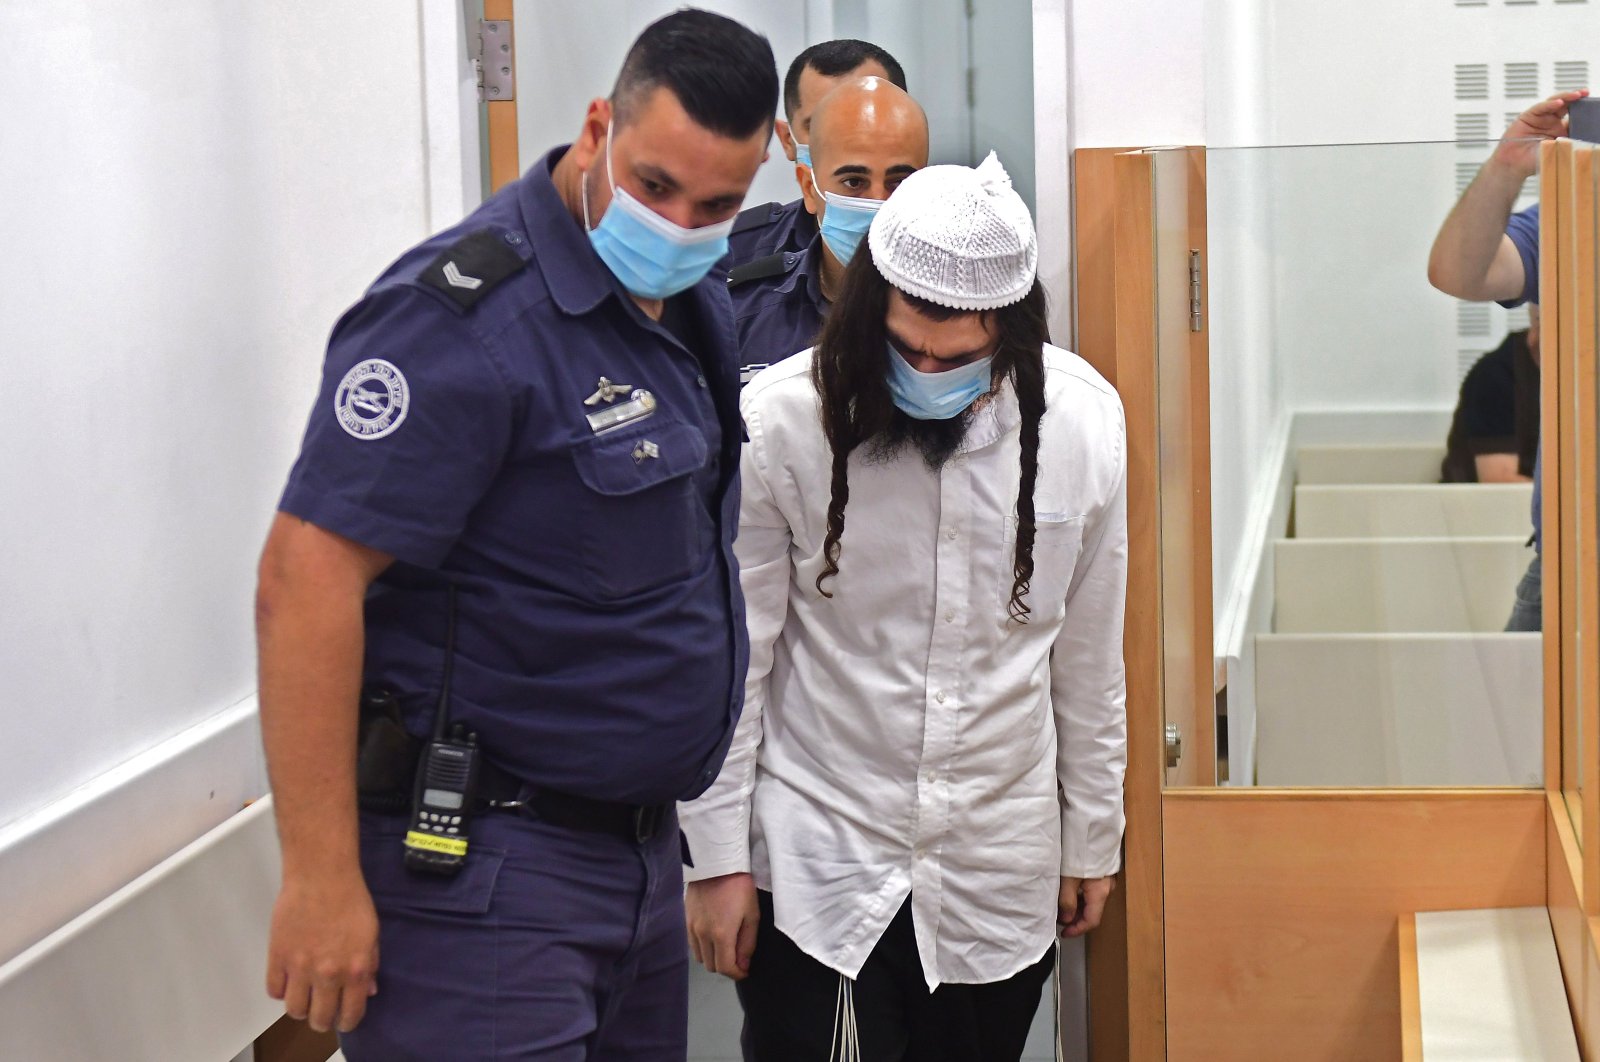 Amiram Ben-Uliel, a Jewish settler, is lead by police into court at the Central Lod District Court, in the central Israeli city on May 18, 2020, for his sentencing hearing over the 2015 arson attack that killed a Palestinian toddler and his parents. (AFP Photo)